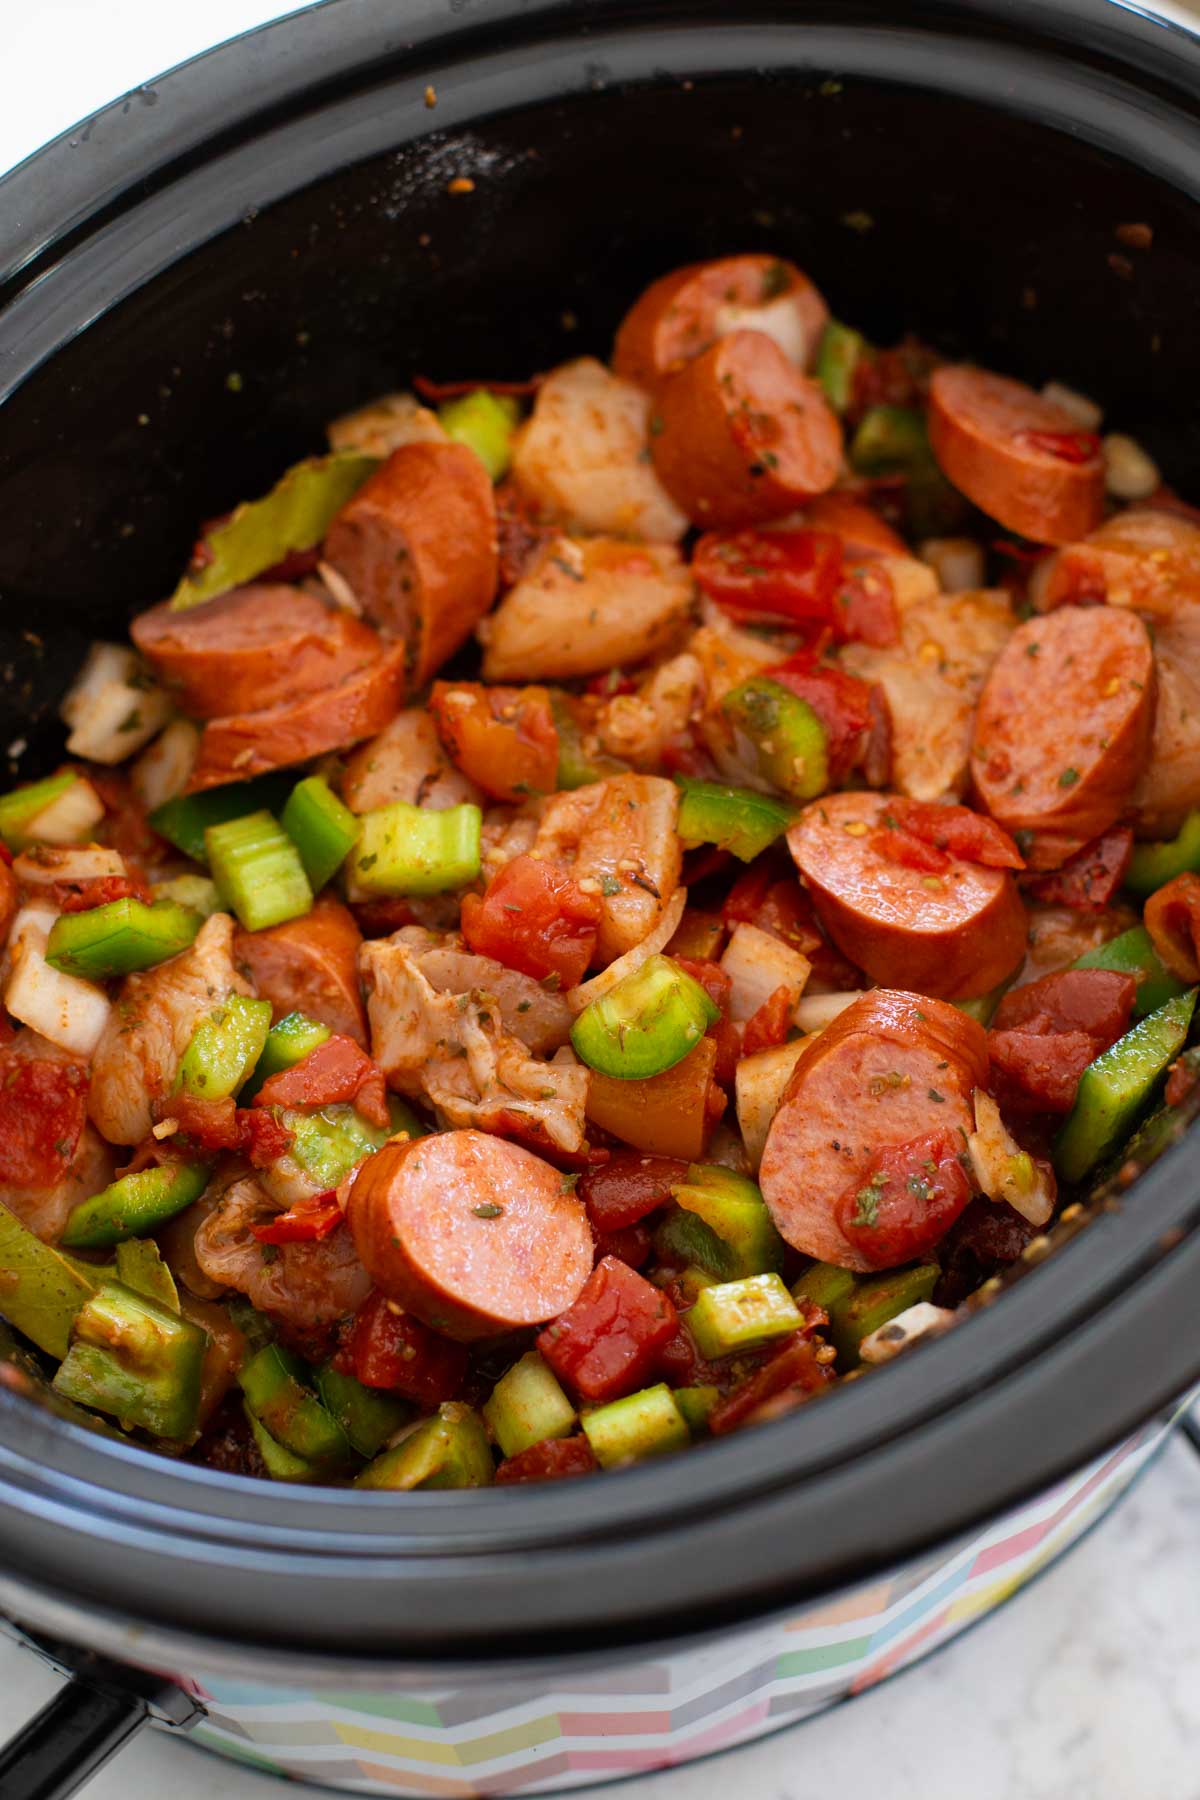 The chopped chicken and sausage are mixed in to cook longer than the shrimp.